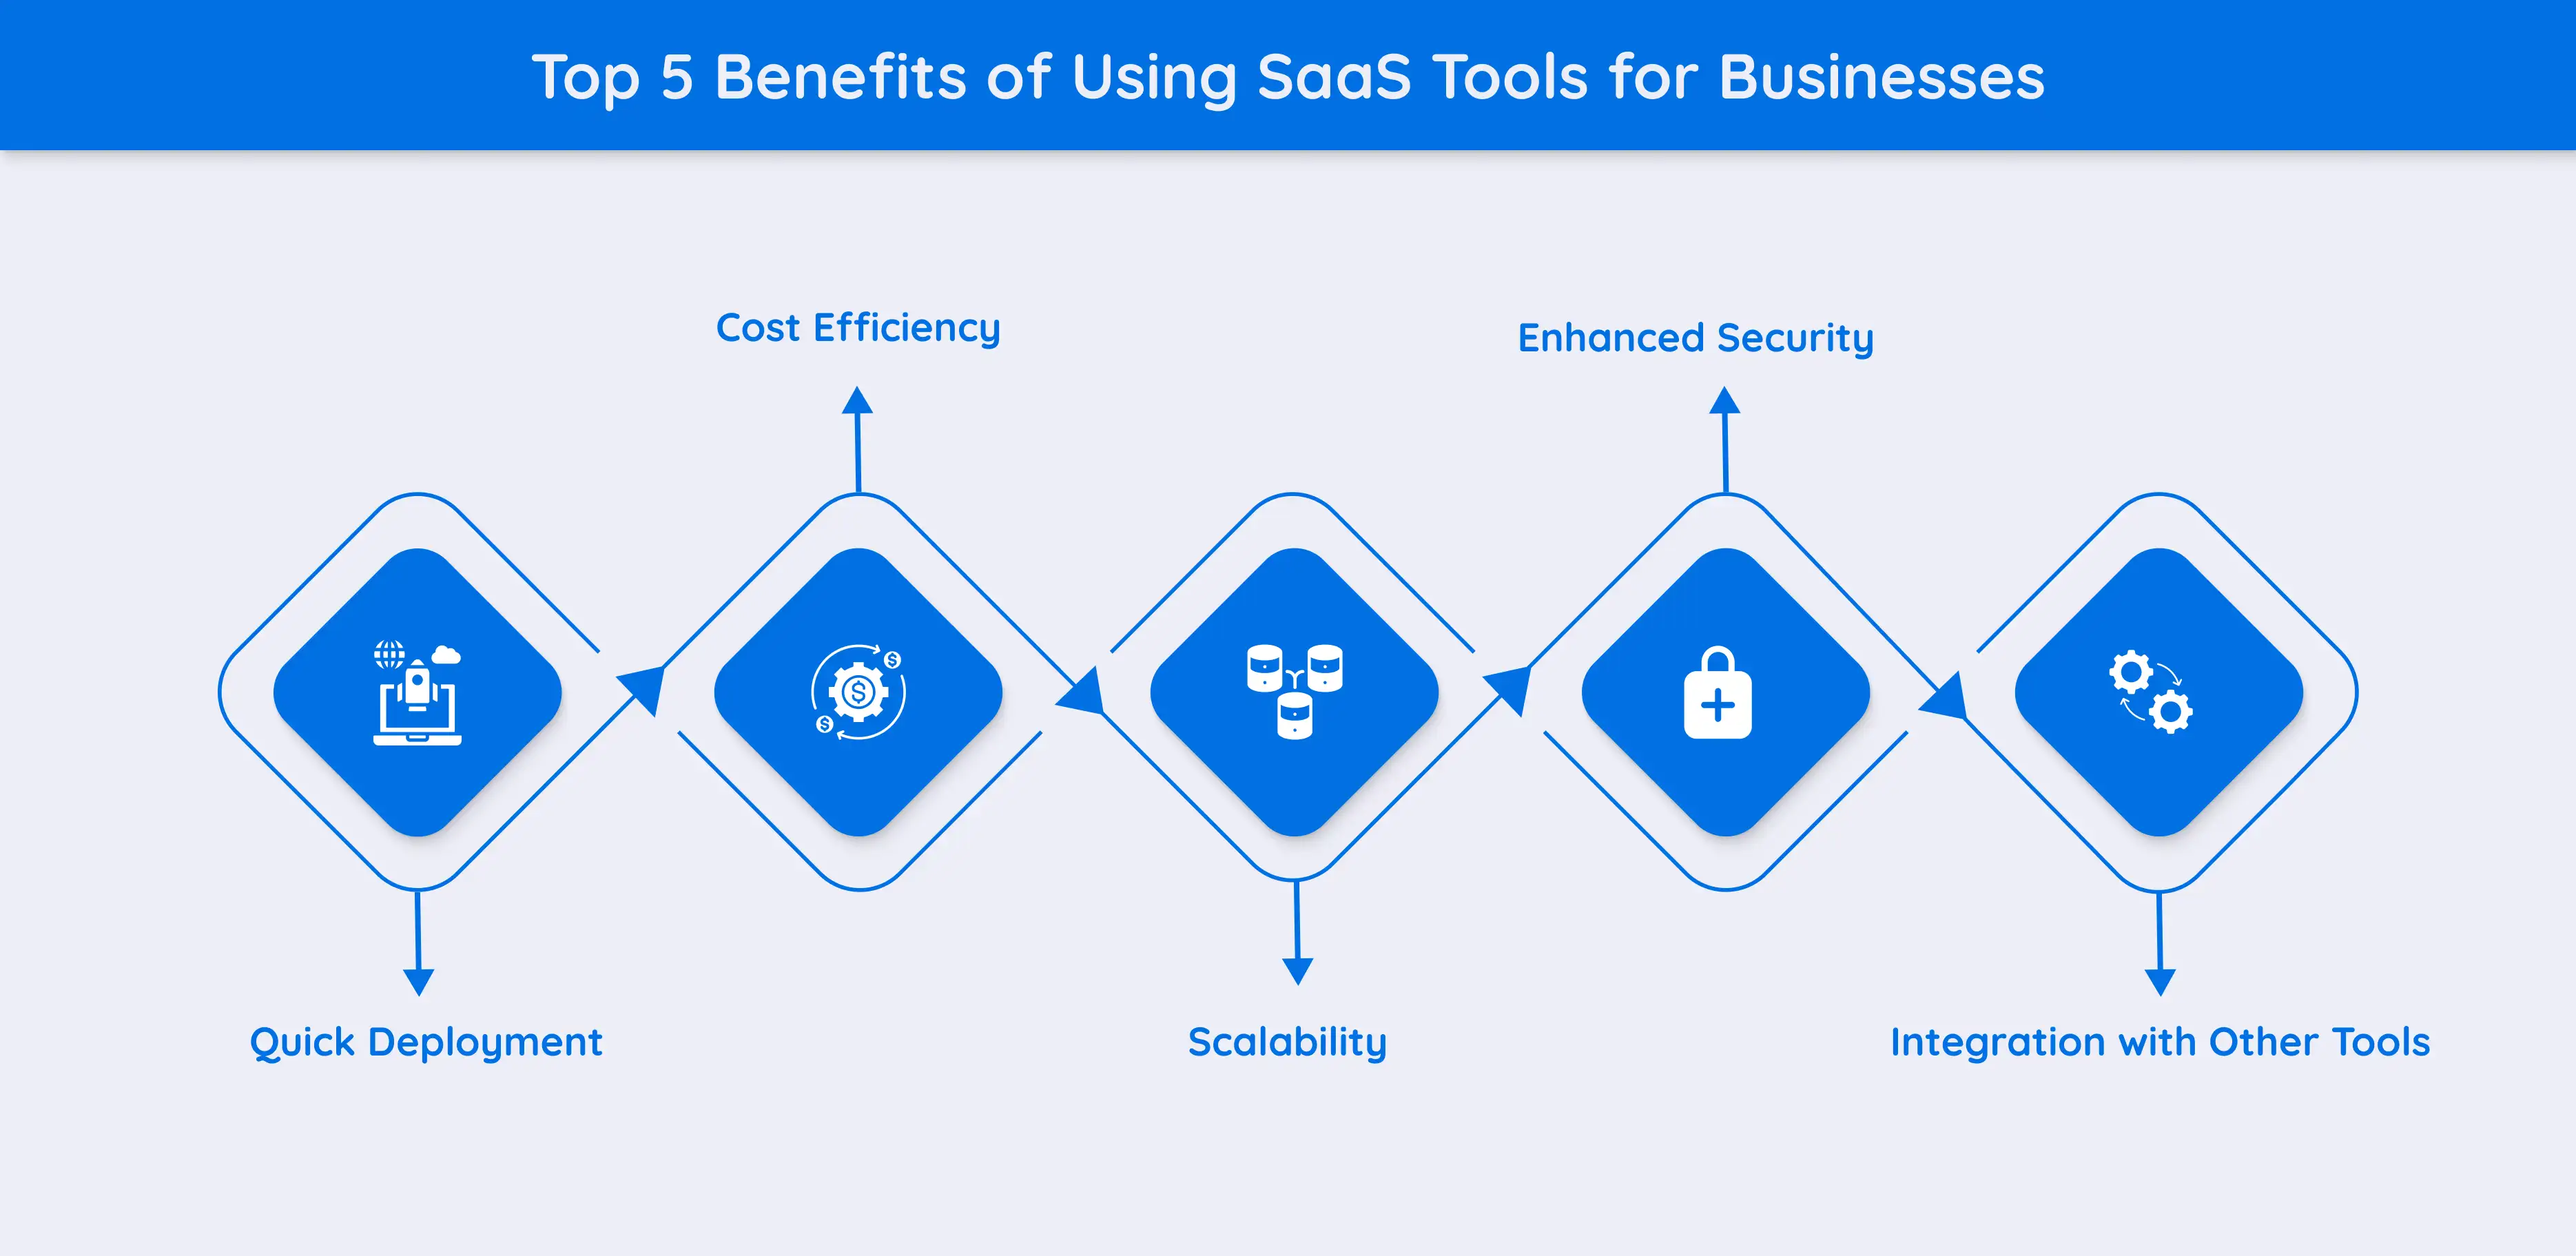 A Visual representation of Top 5 Benefits of Using SaaS Tools for Businesses.